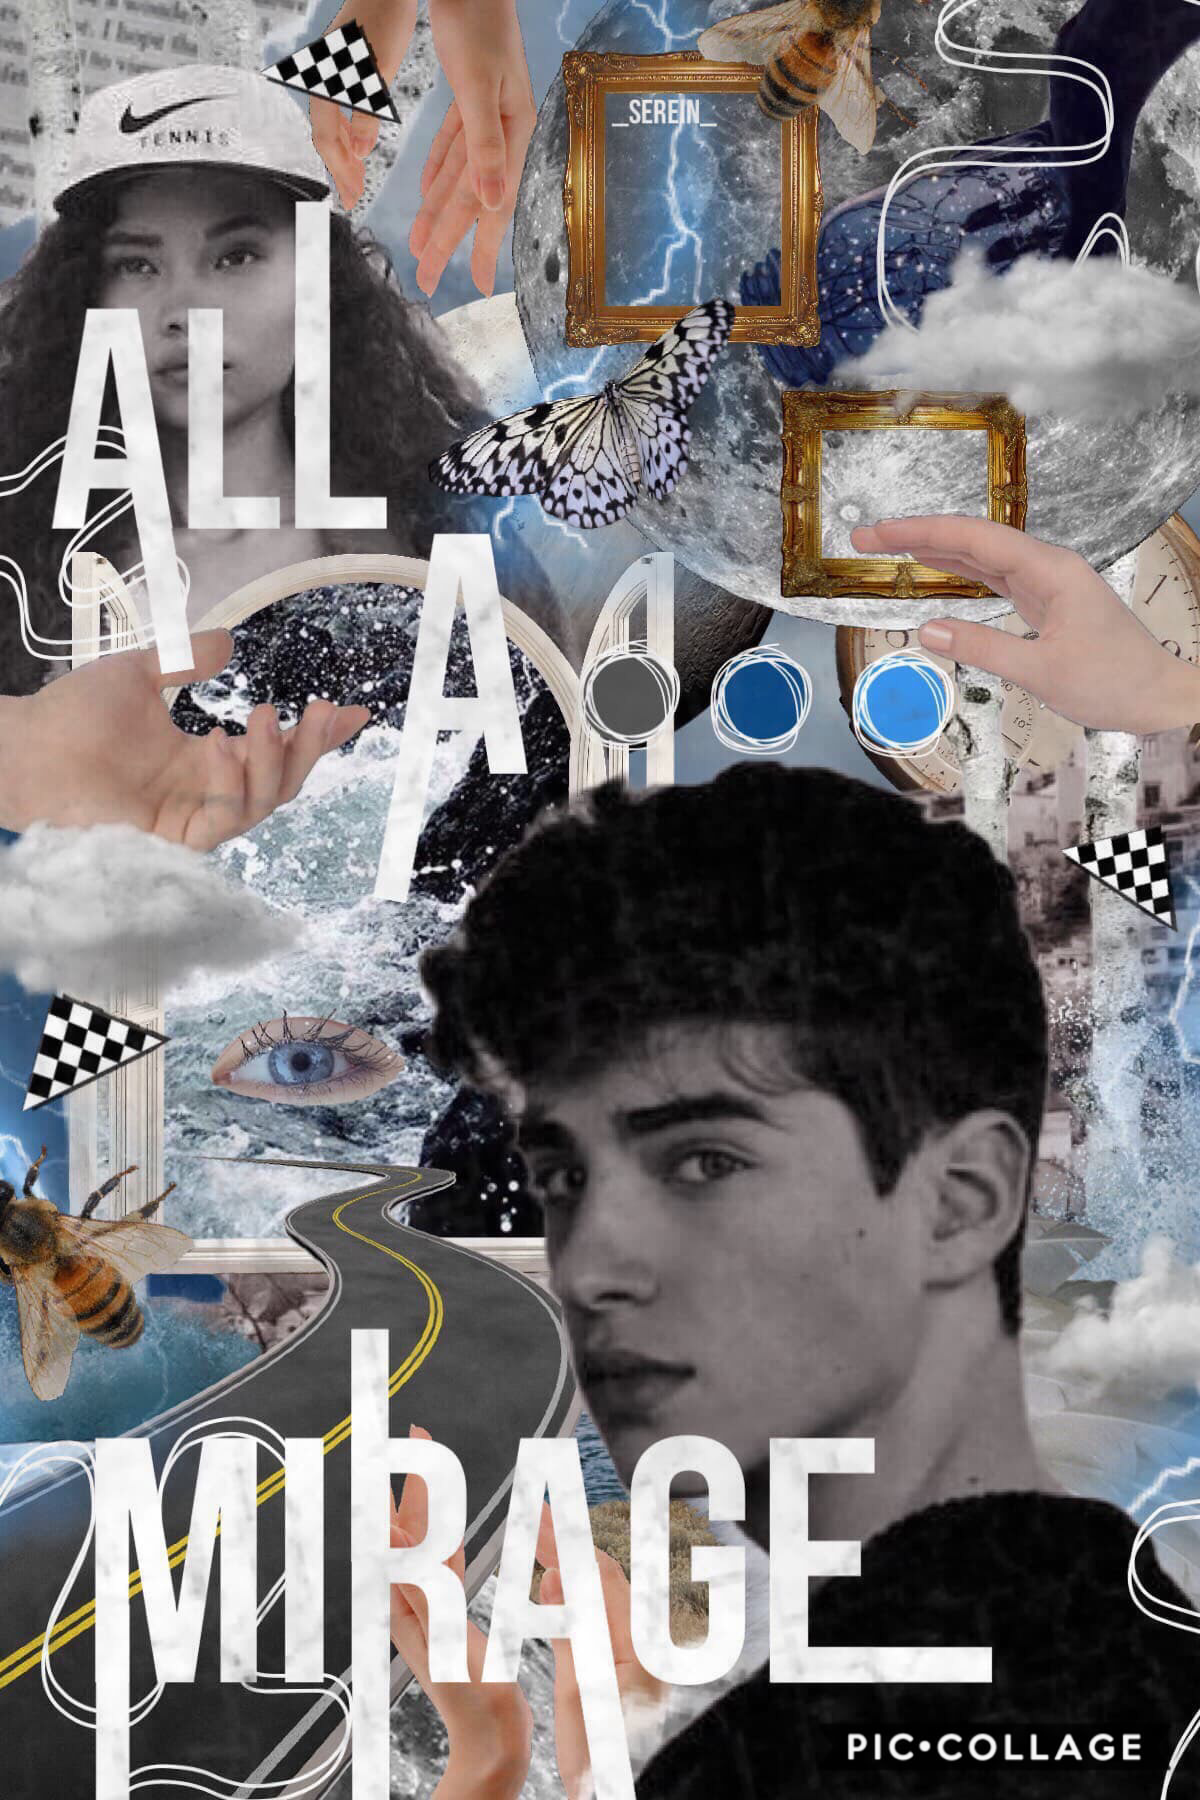 💧TAP💧
“All a mirage.” -me lmaooo
🌫Sending storm vibes at you🌫
You are strong, kind and most importantly, you were born into this world for a reason, which is to make a difference where no one else will. Don’t let others define you, and love yourself like 